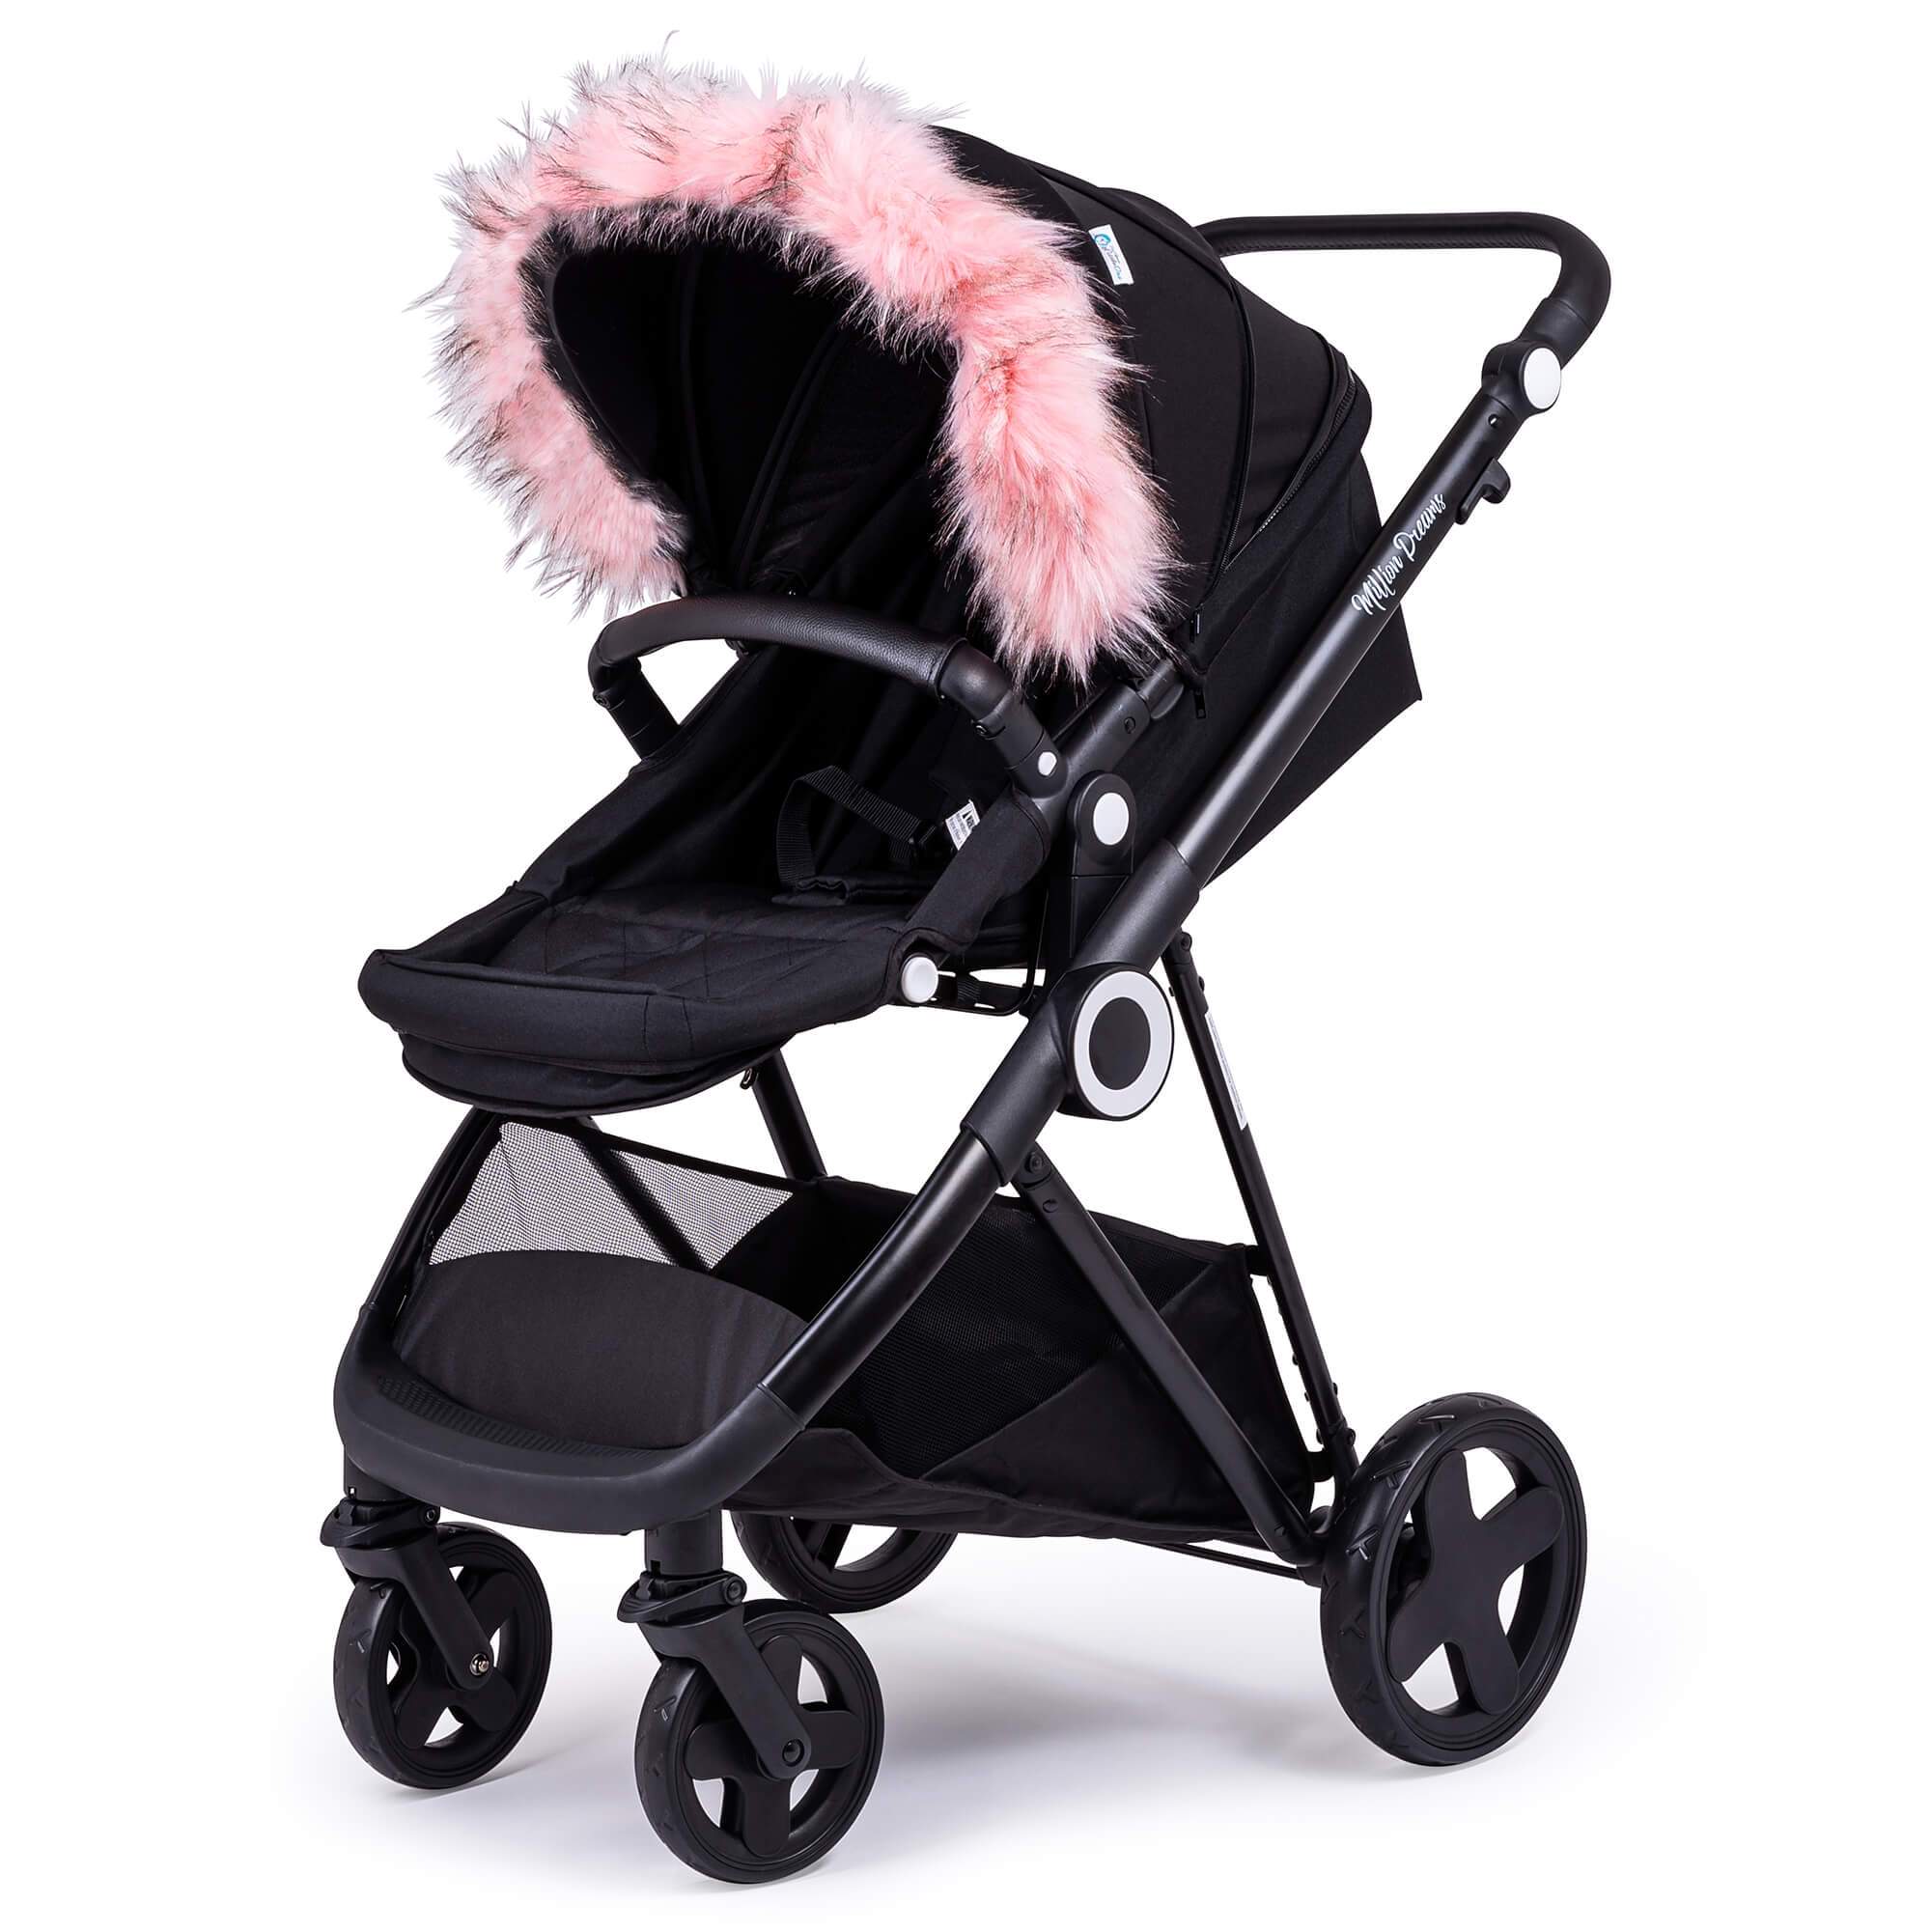 Pram Fur Hood Trim Attachment for Pushchair Compatible with Zeta - Light Pink / Fits All Models | For Your Little One